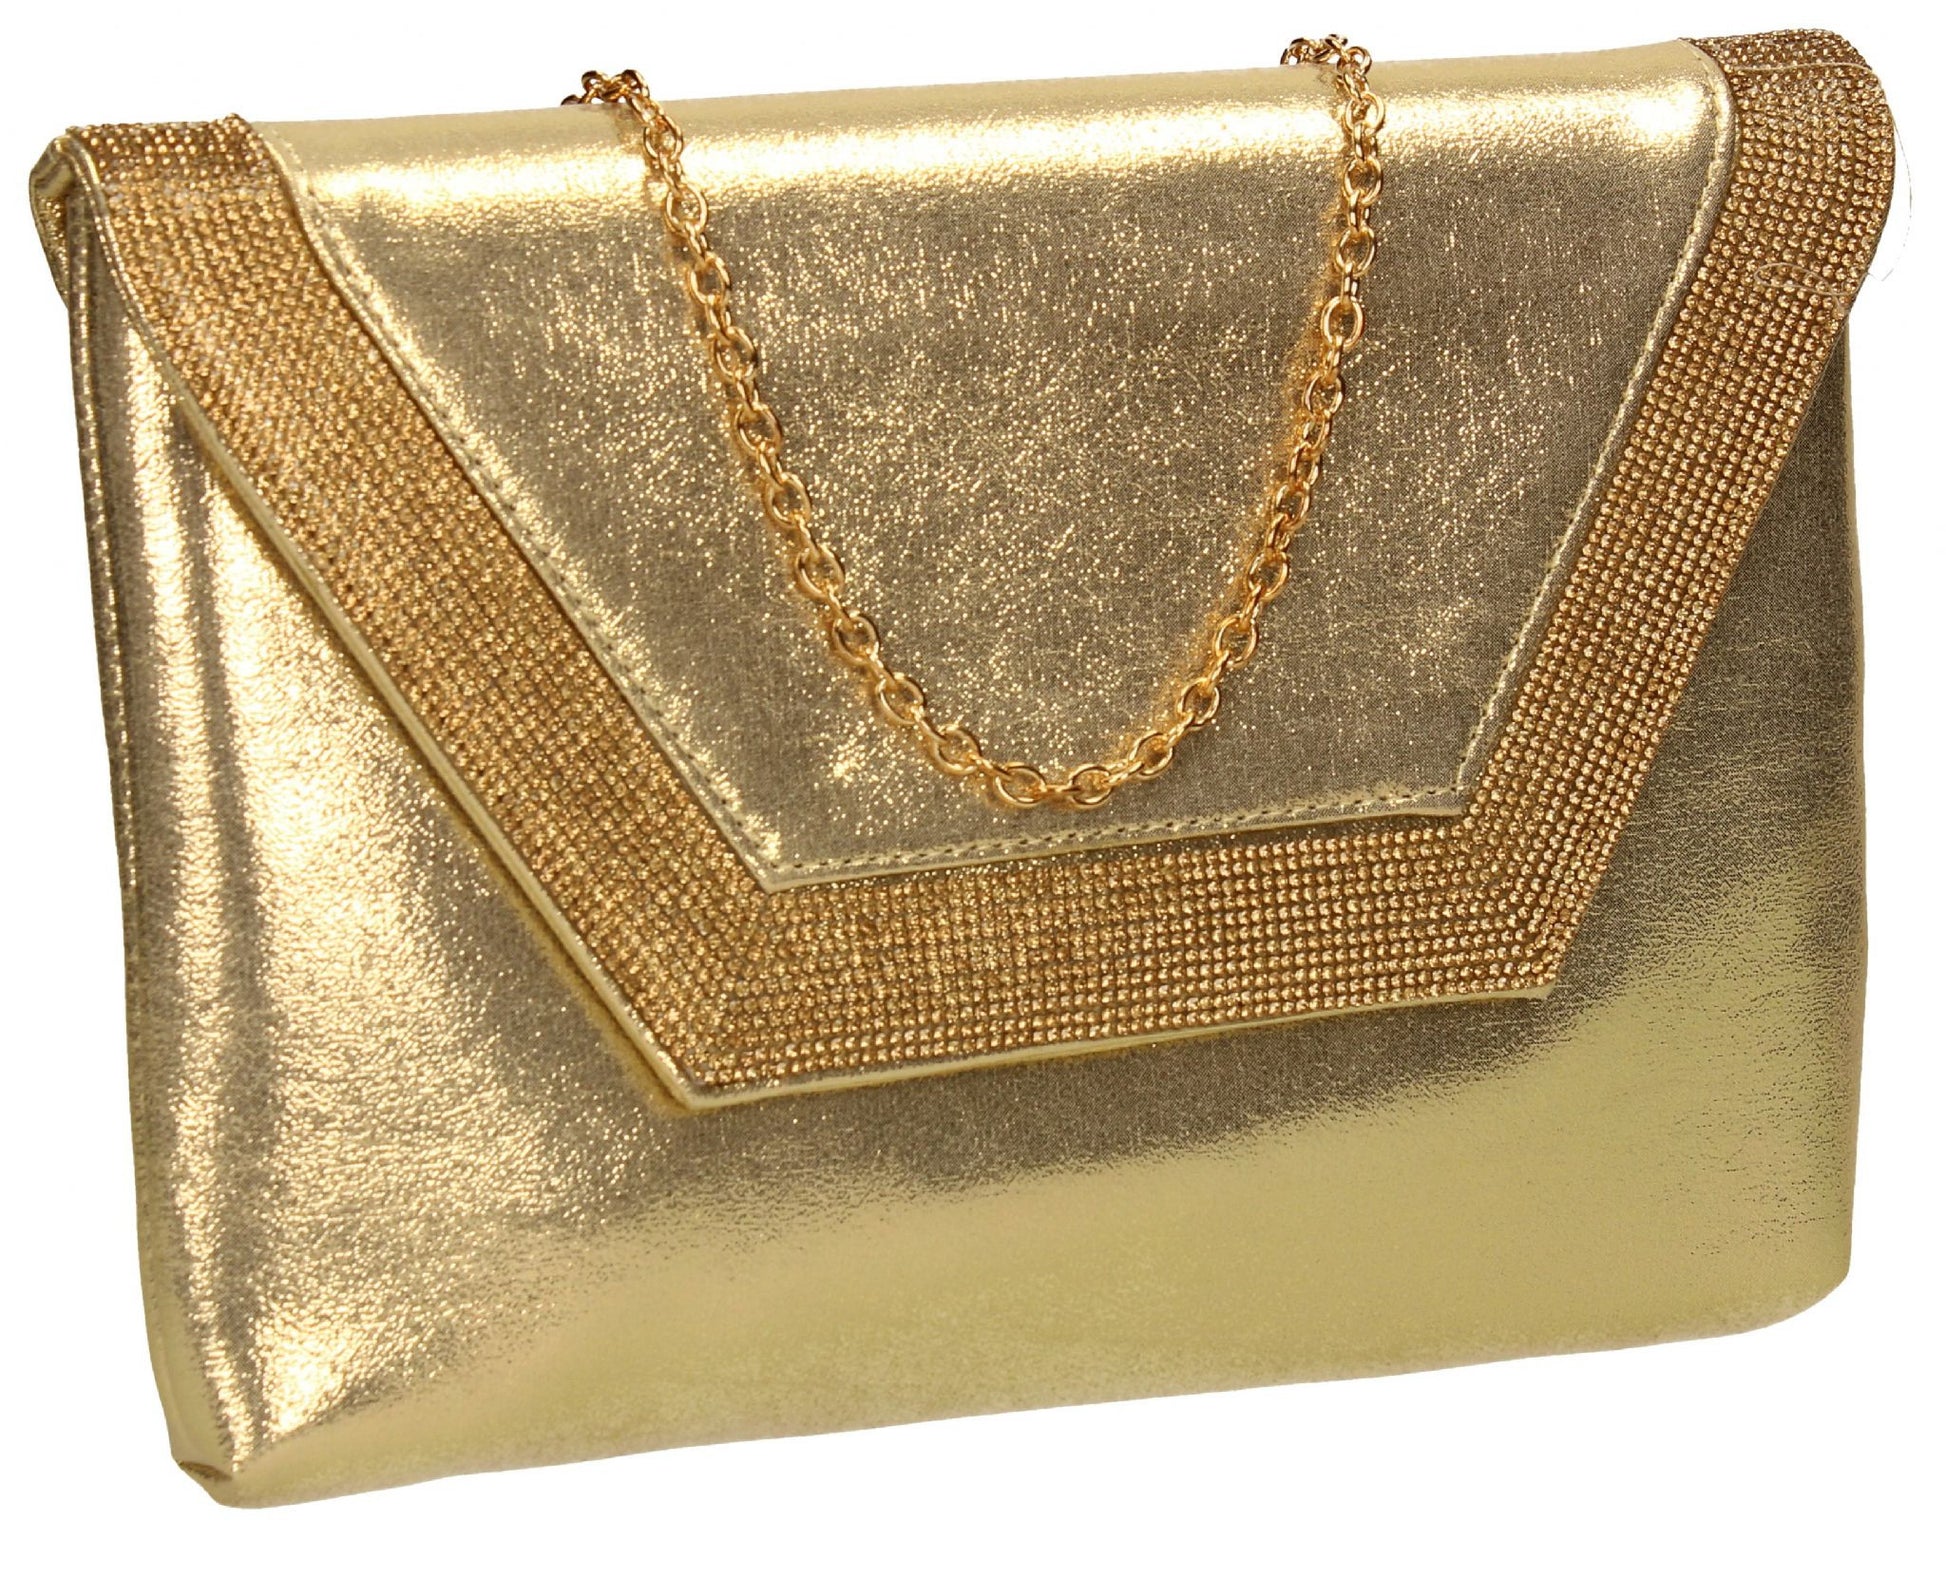 SWANKYSWANS Lilly Clutch Bag Gold Cute Cheap Clutch Bag For Weddings School and Work